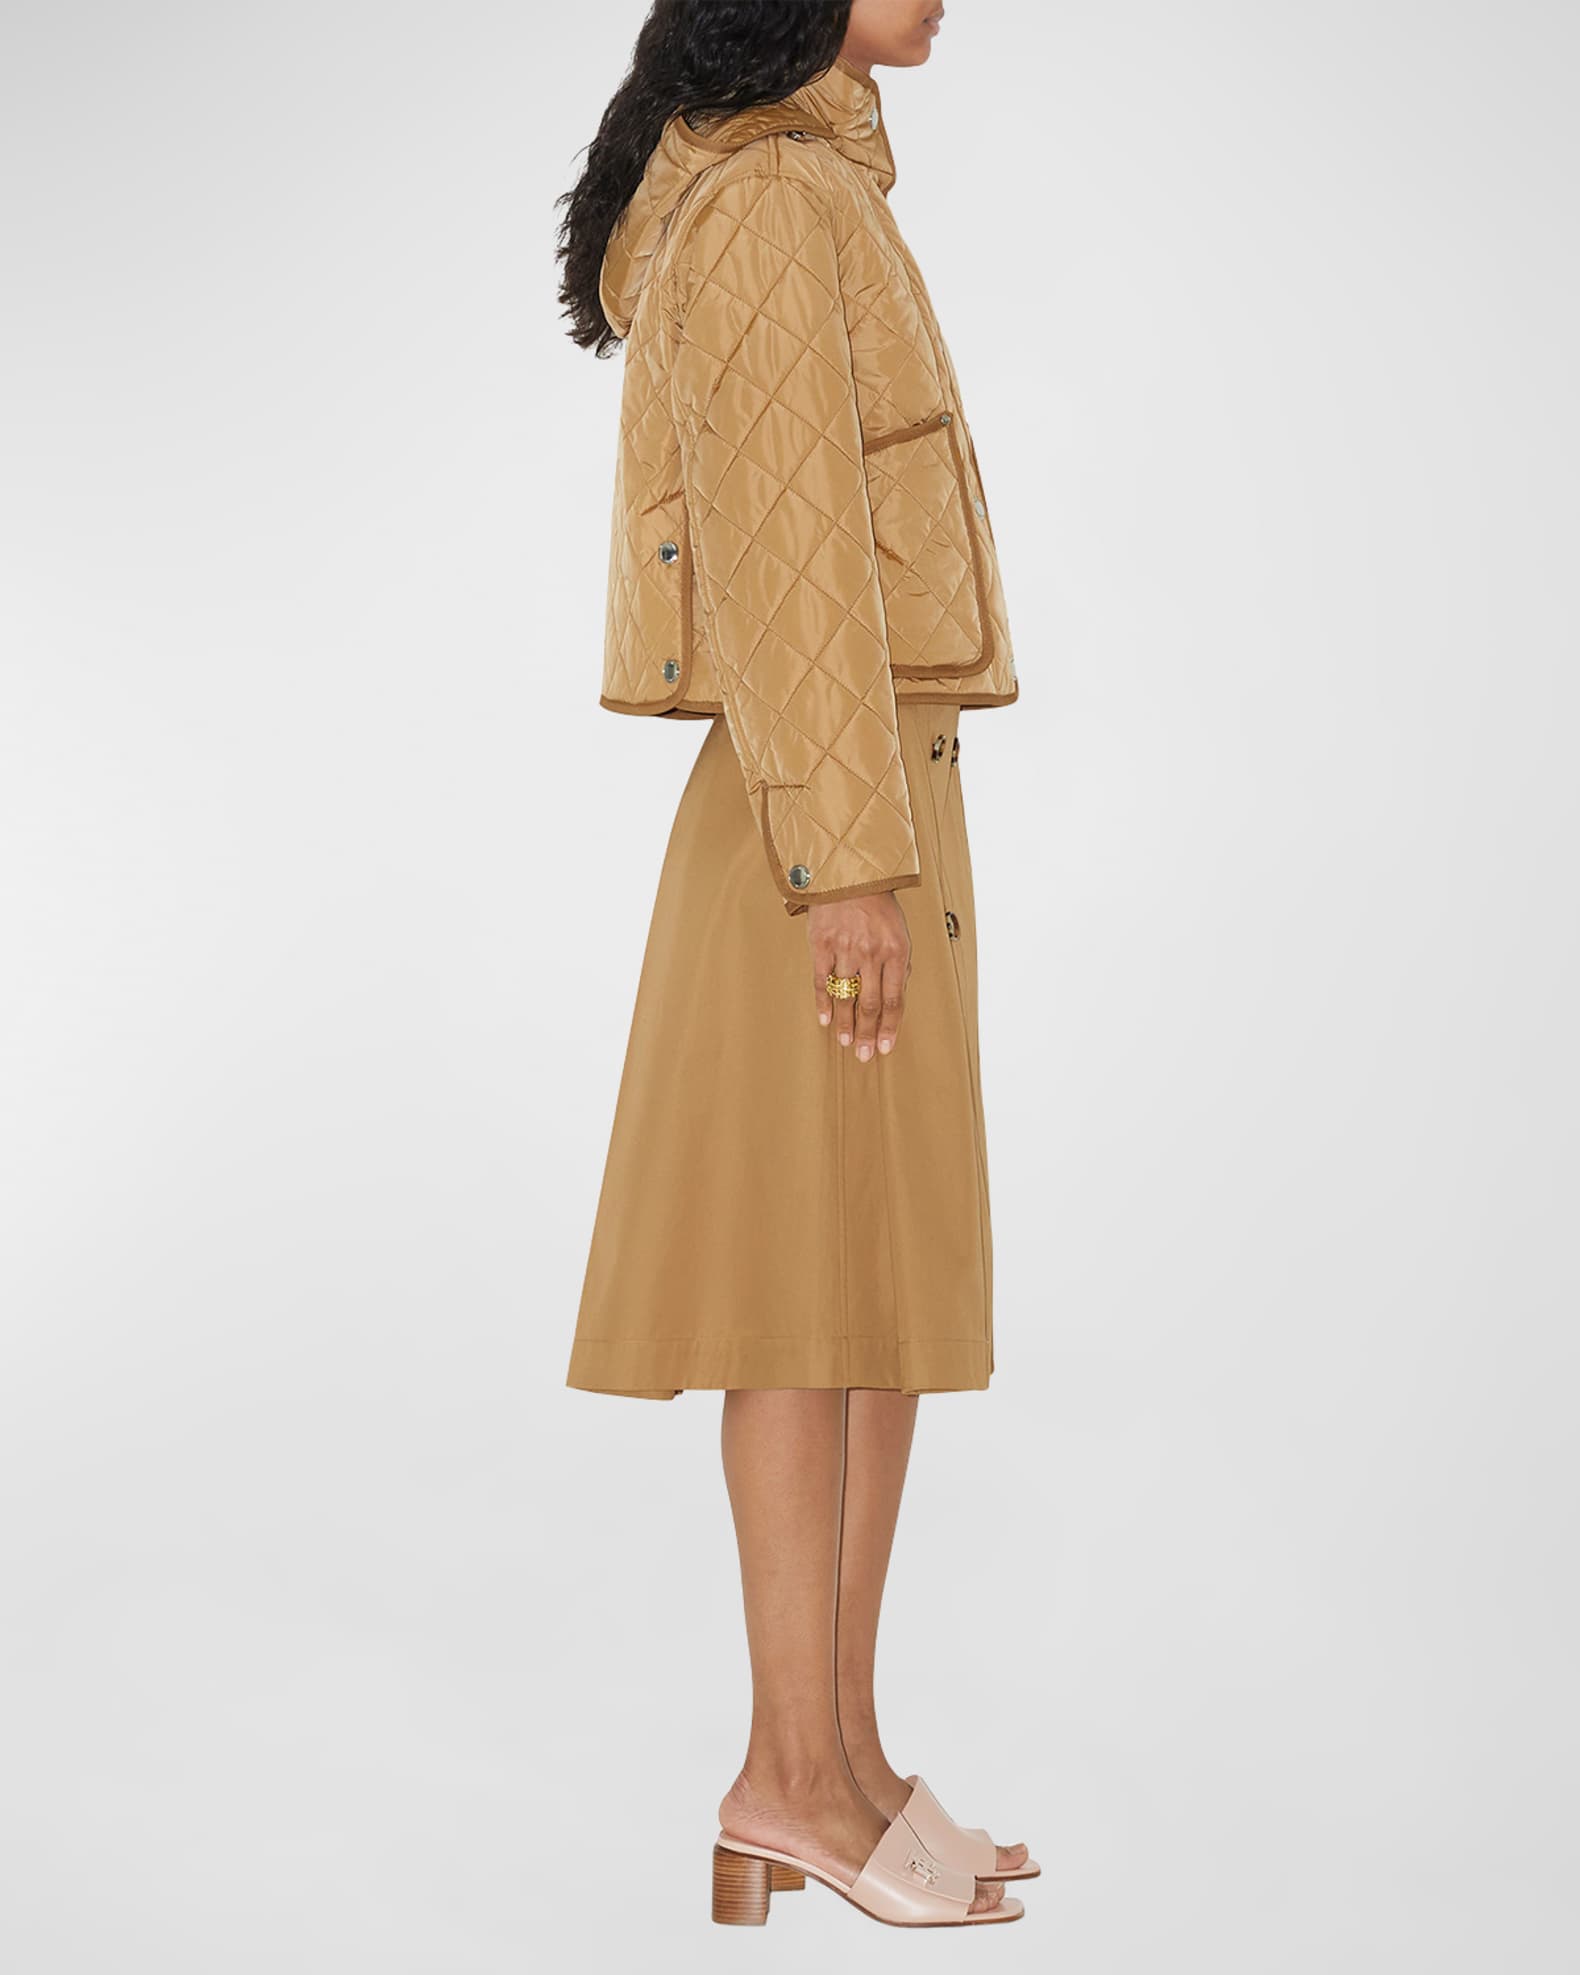 Burberry Baleigh Button-Front Belted Midi Skirt | Neiman Marcus